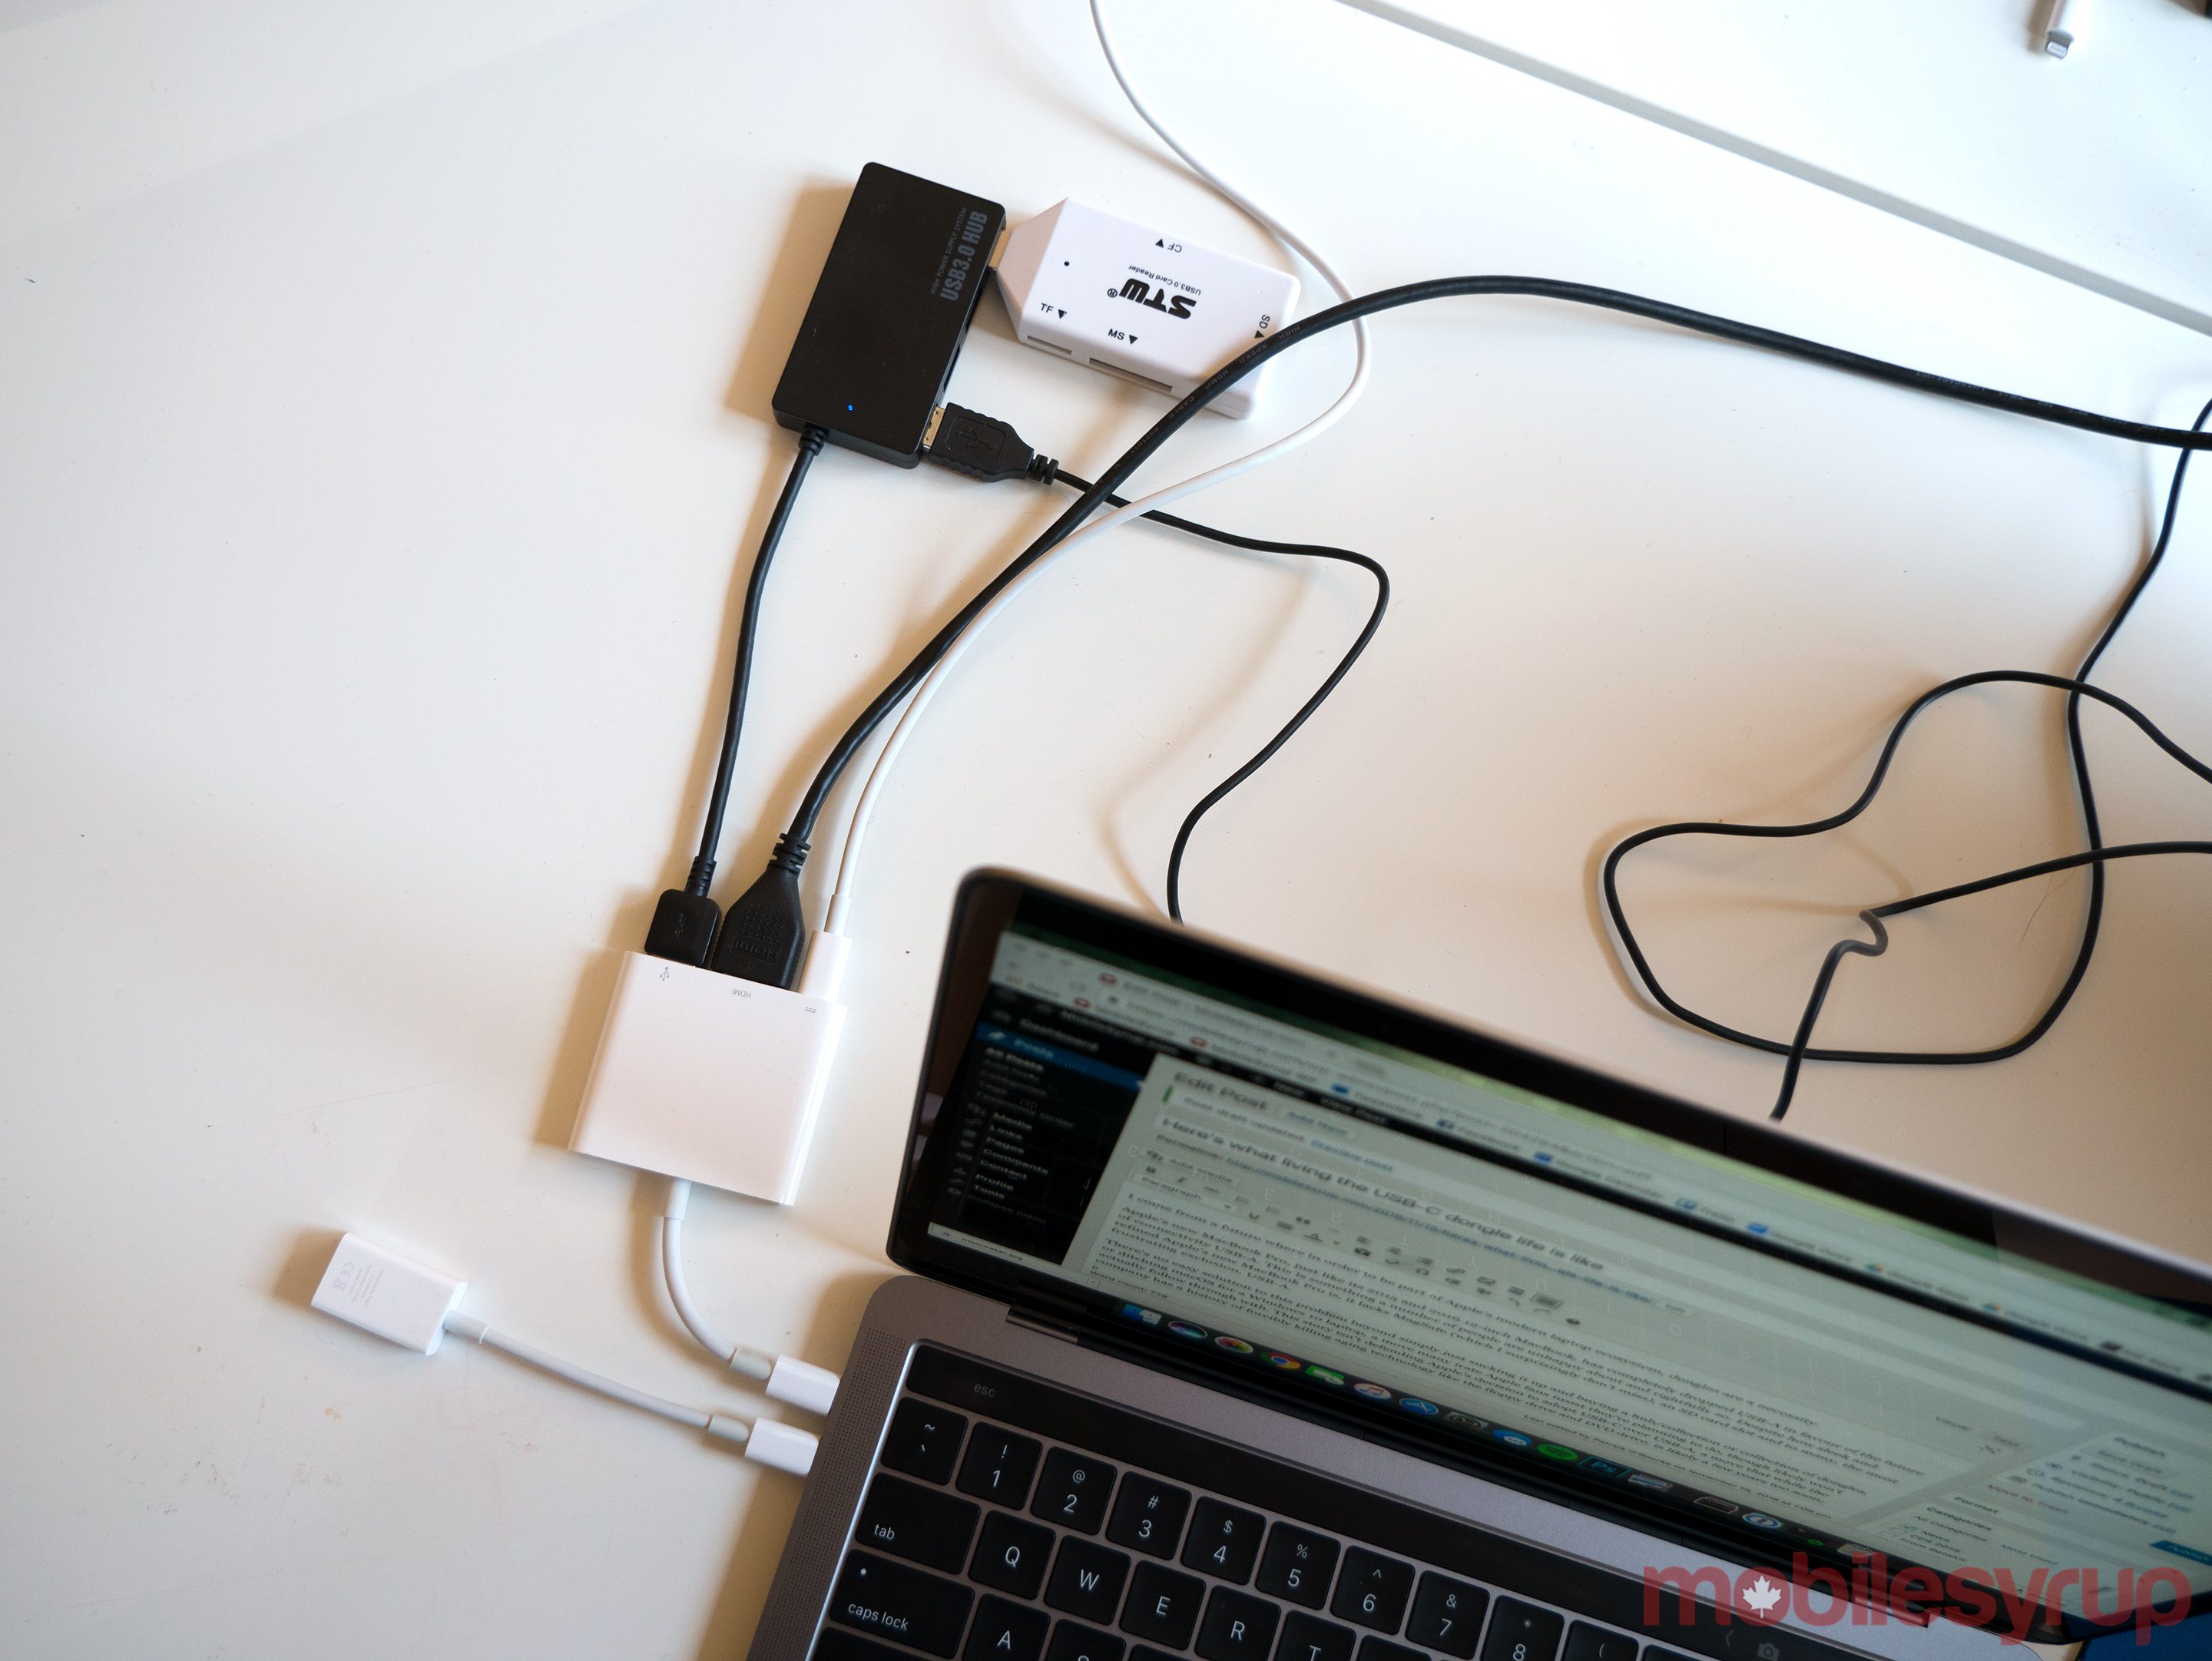 A recent Apple laptop with multiple dongles, some of which are chained.